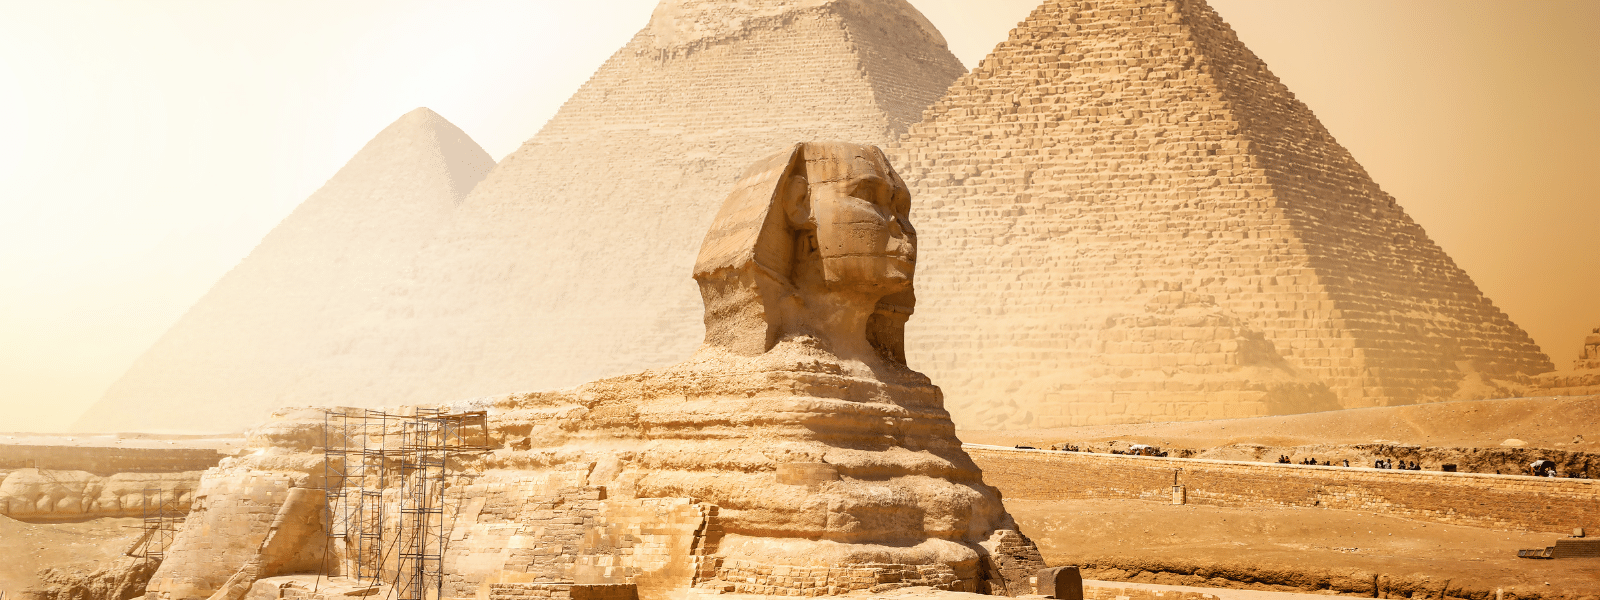 visiter le sphinx egypte